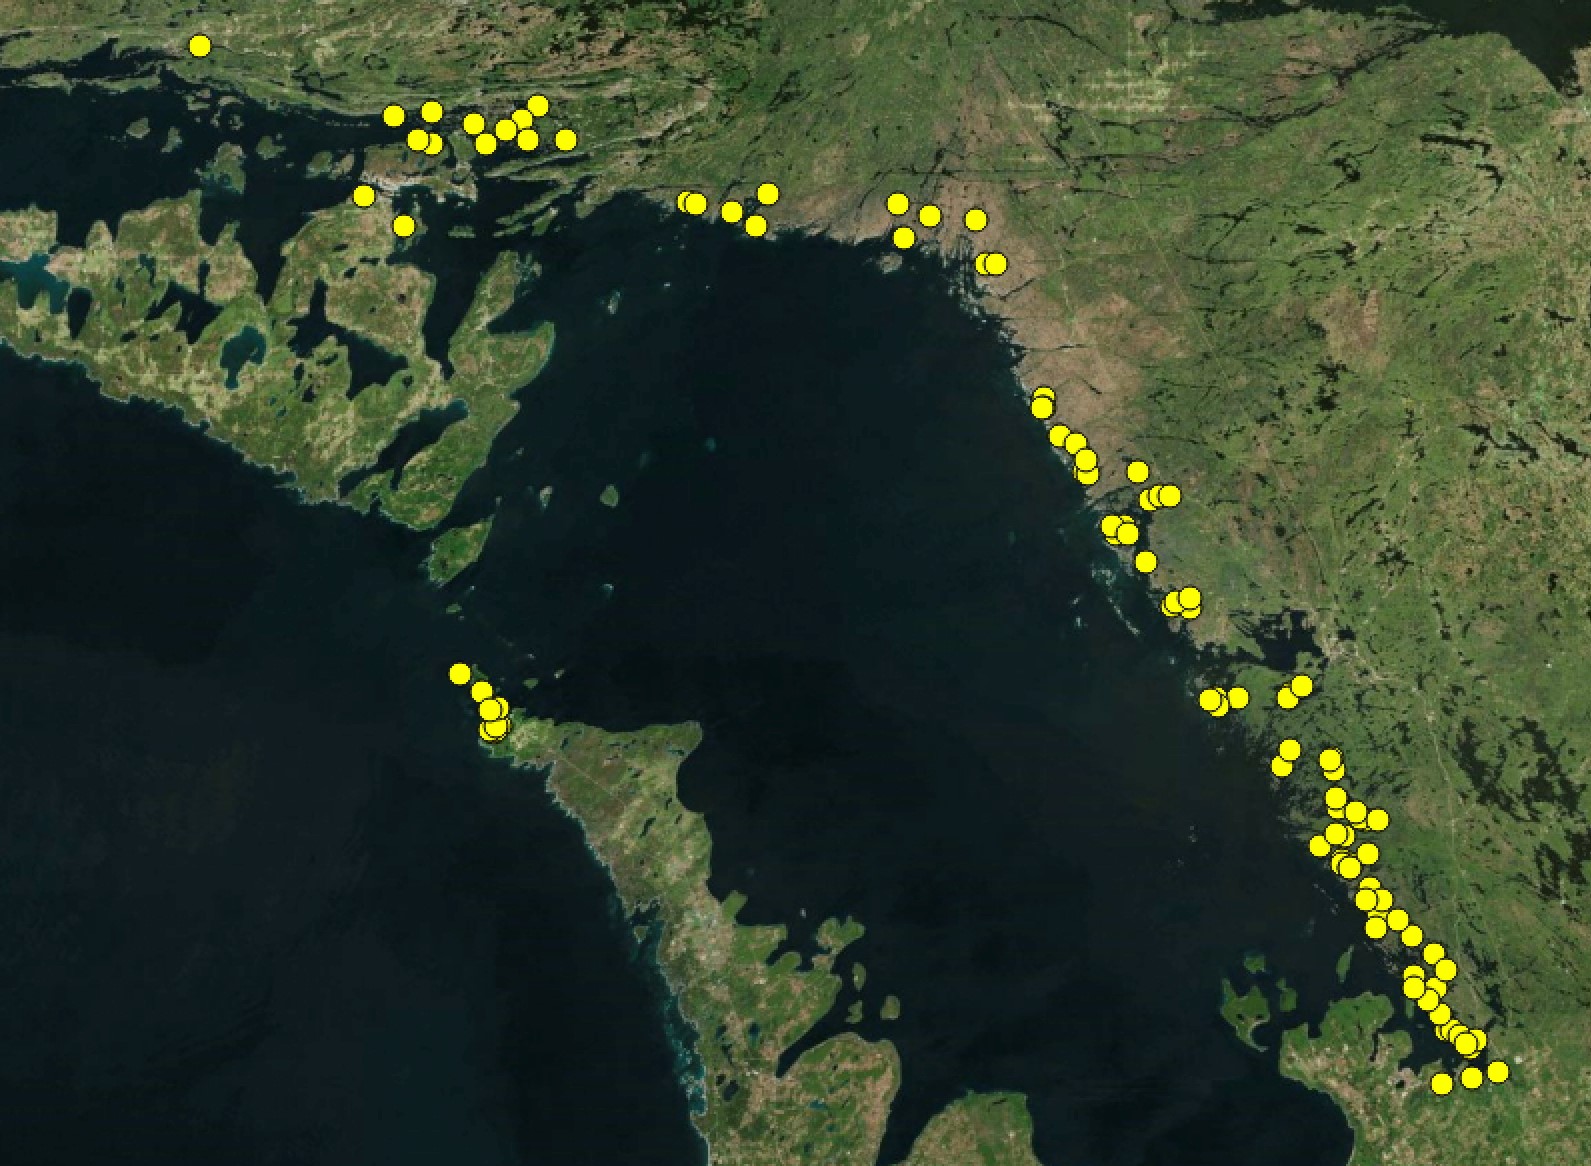 Location of all sites sampled in Georgian Bay between 2003 and 2017 by the Chow-Fraser lab